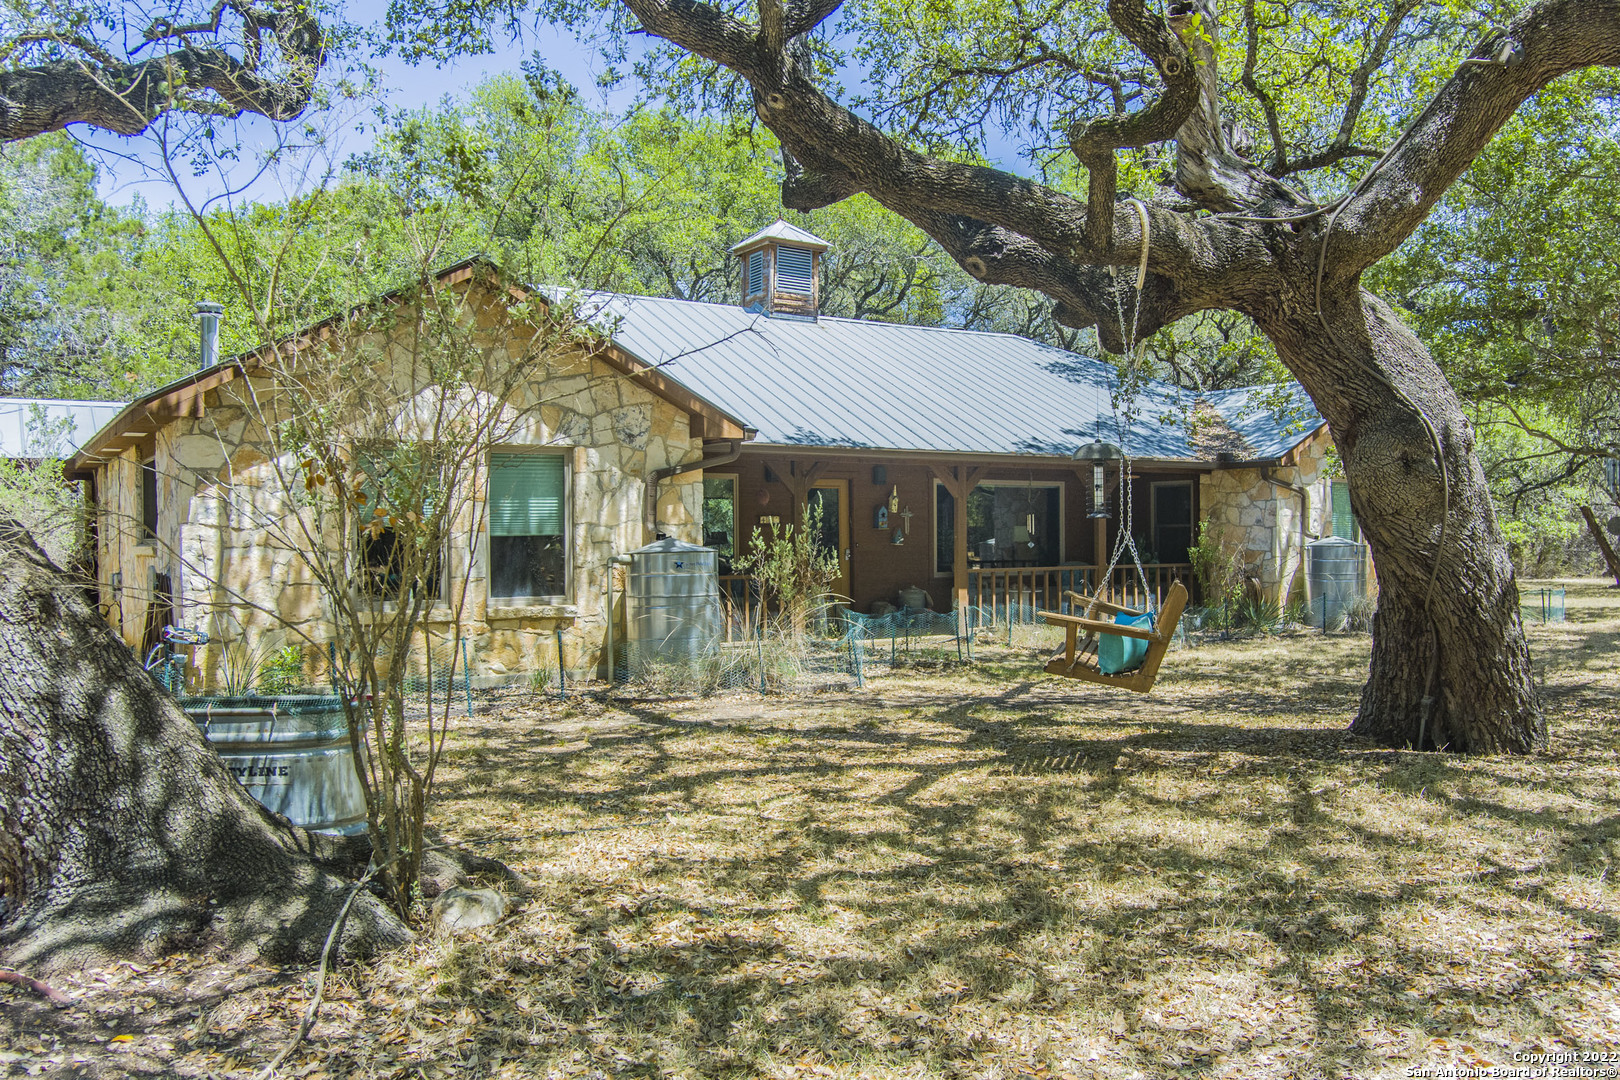 A Texas Hill Country Nature Lover's Paradise!  This lovely home on 6.07 wooded acres awaits you in Bulverde Tx.  A friendly Mermaid will greet you as you drive up to the house down a wandering road through the trees.  Upon entering the house you'll find the Living Room filled with light due to the Huge Picture Window that looks out on the back yard's massive Oak Trees. All windows are super energy efficient which helps for low electric bills.  The Island Kitchen and Utility Room both have an abundance of storage.  The Primary Bedroom brings nature indoors with it's large picture windows.  All 3 bedrooms are oversized and have large closets.  A Wooden Deck stretches across the back of the house and is perfect for BBQs or for sitting out in the evenings and watching deer, hummingbirds and other wildlife in the yard. A fully fenced garden area with 2 keyhole raised garden beds and rain catchment setup to water with. Two, free standing wood burning stoves to take the nip off of a cool night are in the living room and master bedroom for your comfort. A Boardwalk extends from the deck and takes you to two large, wonderful Workshops, one complete with air conditioning - A Crafter's Paradise!  This cozy home invites you to escape the city and come and live in the woods.